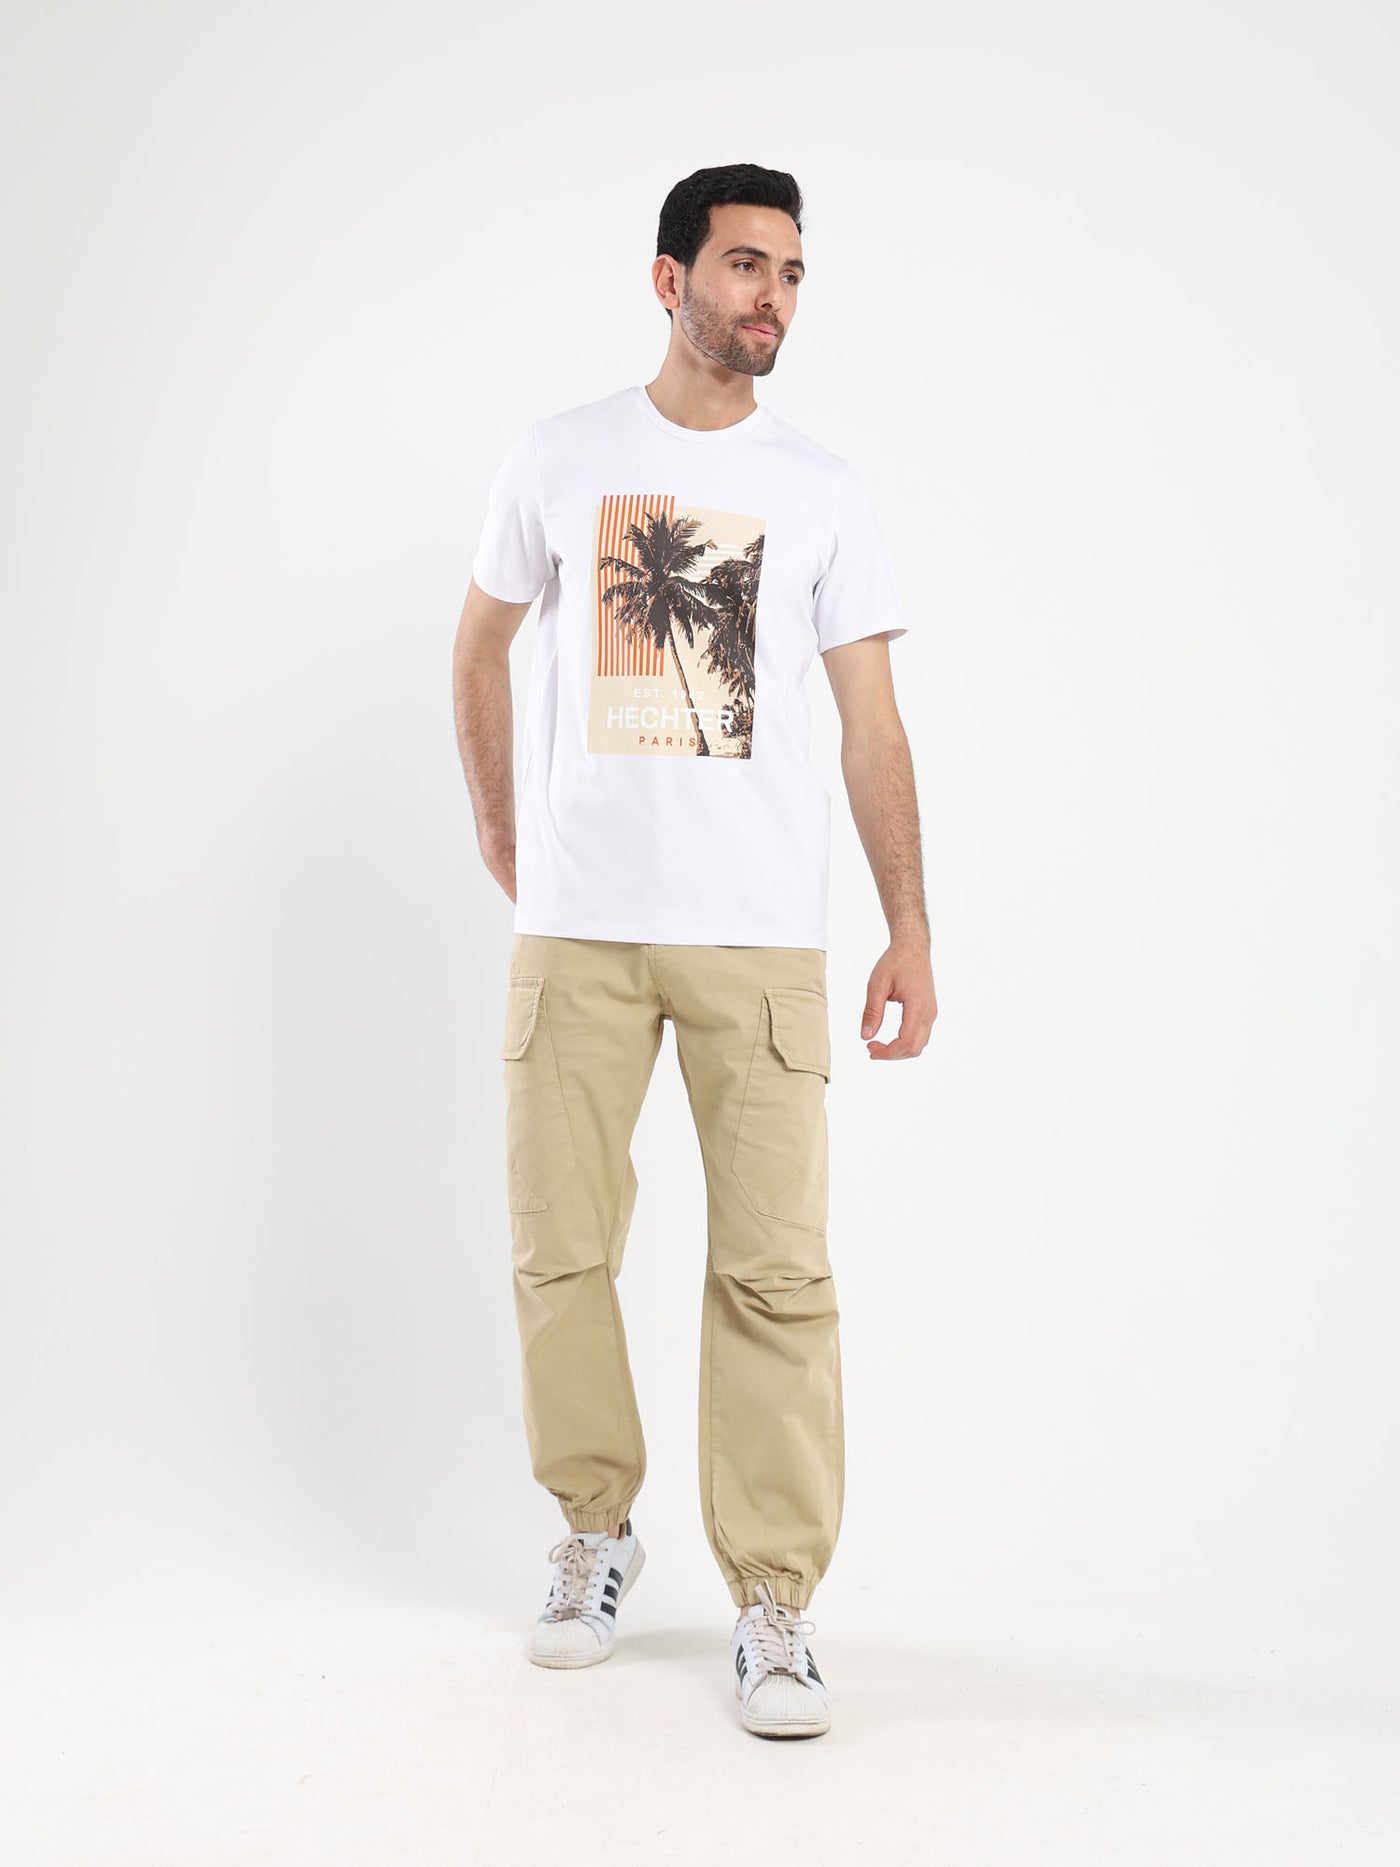 T-Shirt - Front Printed Palm